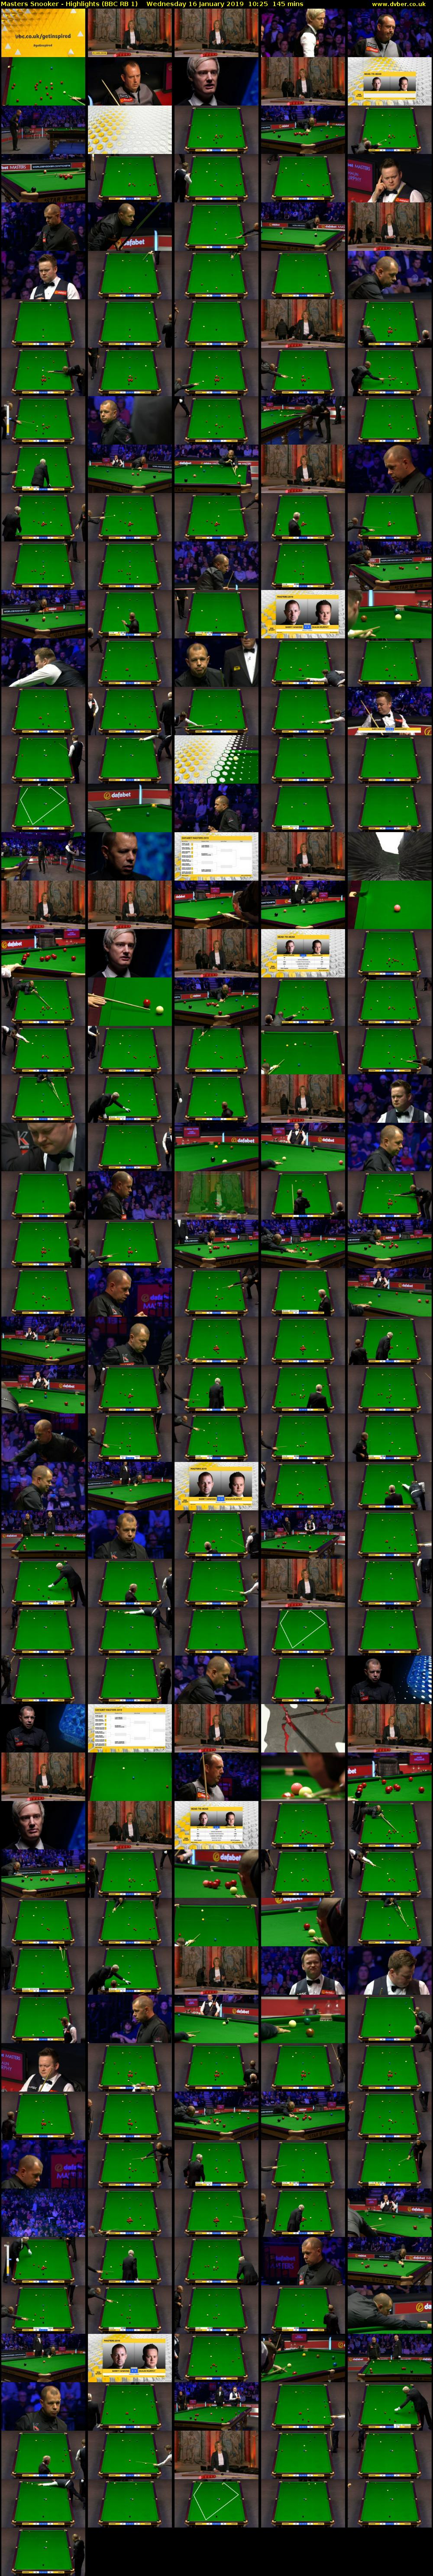 Masters Snooker - Highlights (BBC RB 1) Wednesday 16 January 2019 10:25 - 12:50